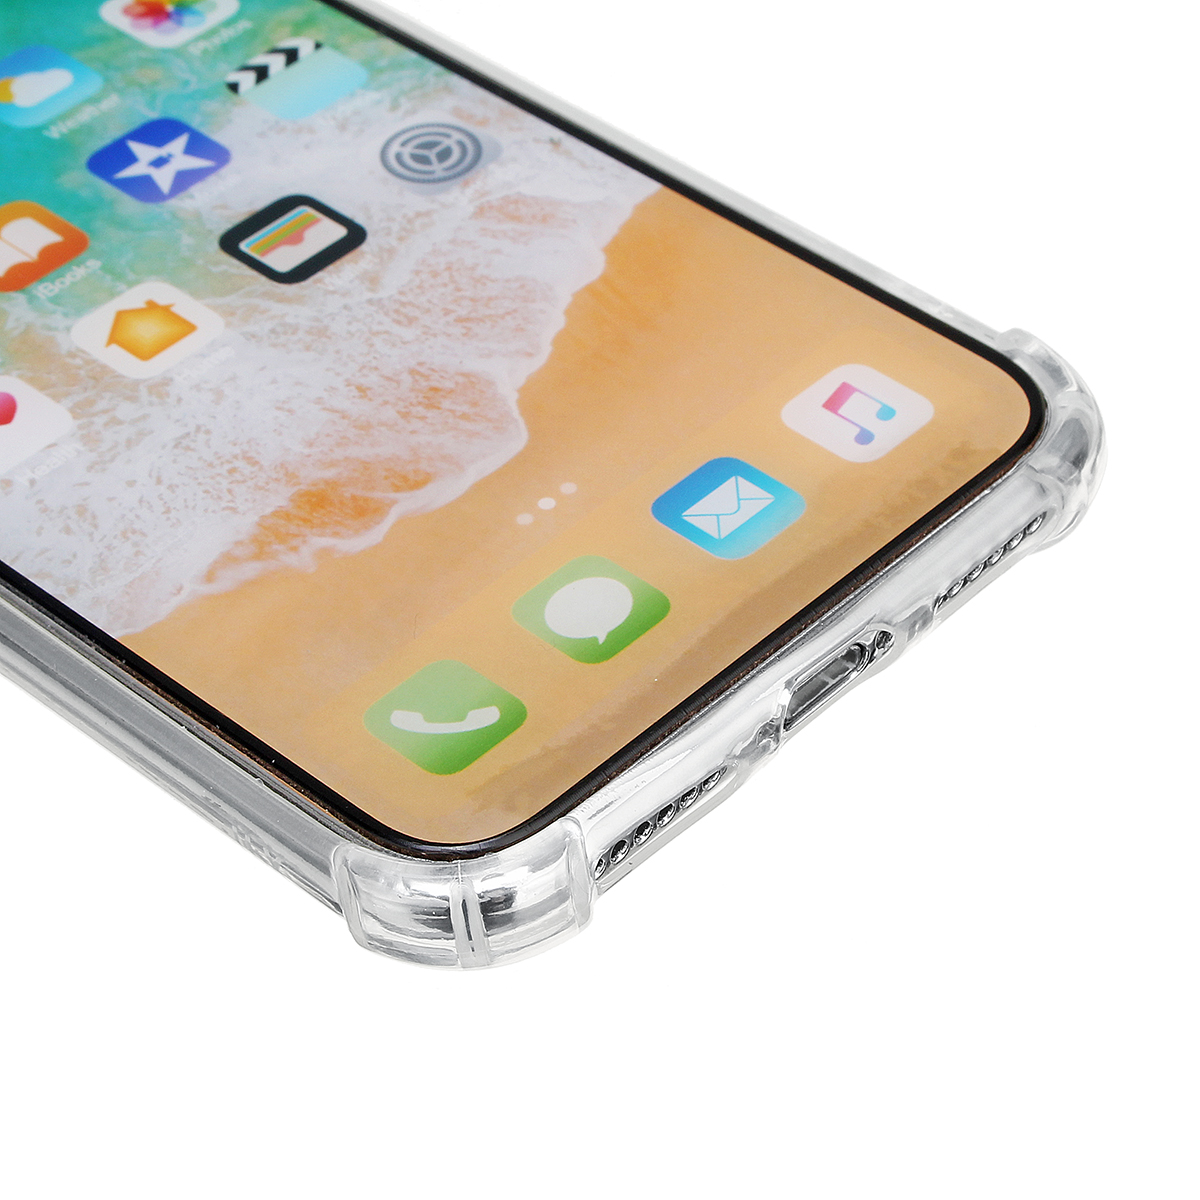 Bakeey-Airbag-Transparent-Clear-Shockproof-Protective-Cover-Case-for-iPhone-X--XS--XR--iP-XS-Max-1633378-6